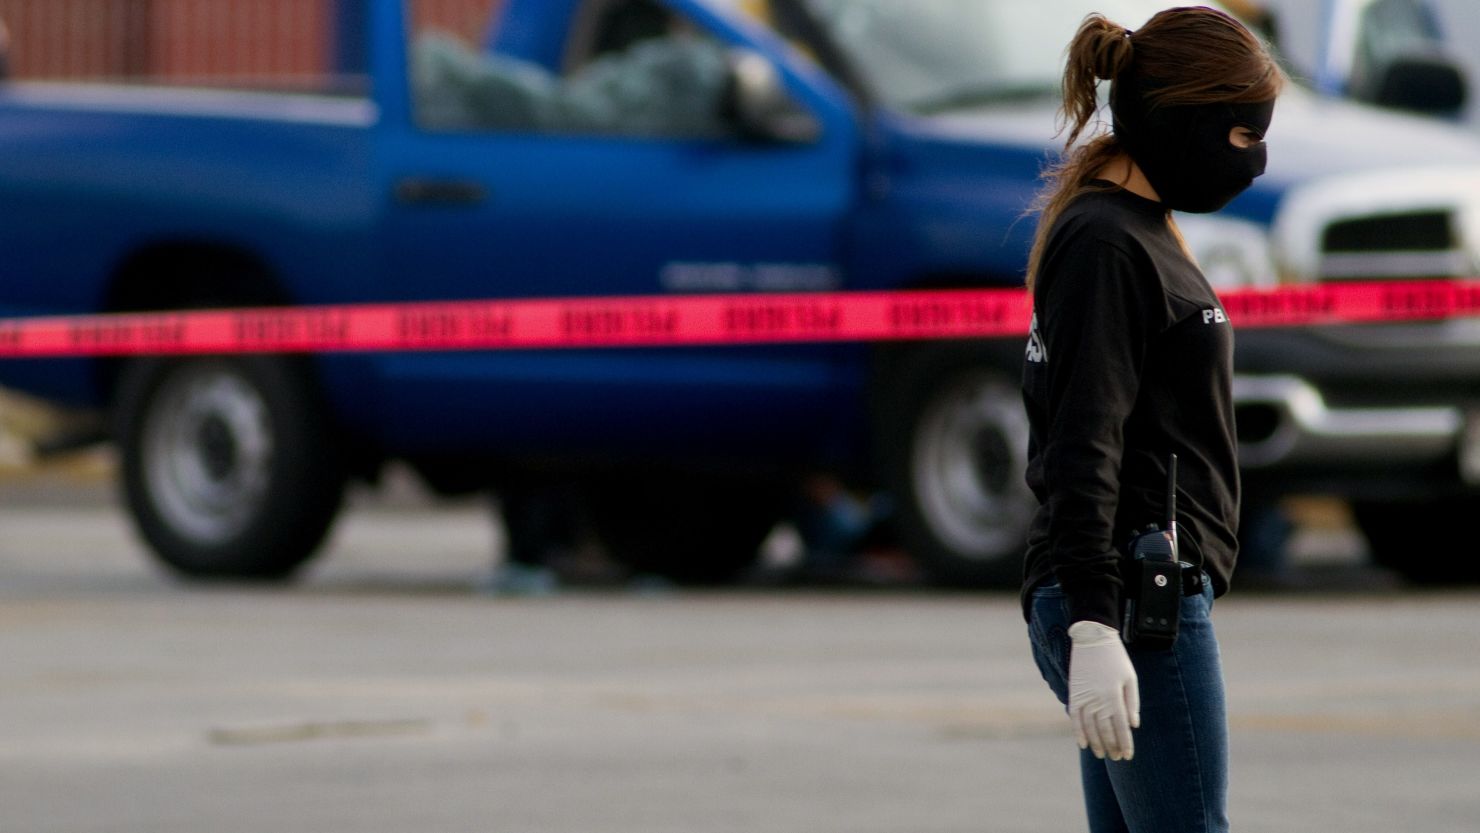 A member of Mexico's Ministerial Police investigates the scene of a murder in Ciudad Juarez on December 6, 2010. FILE